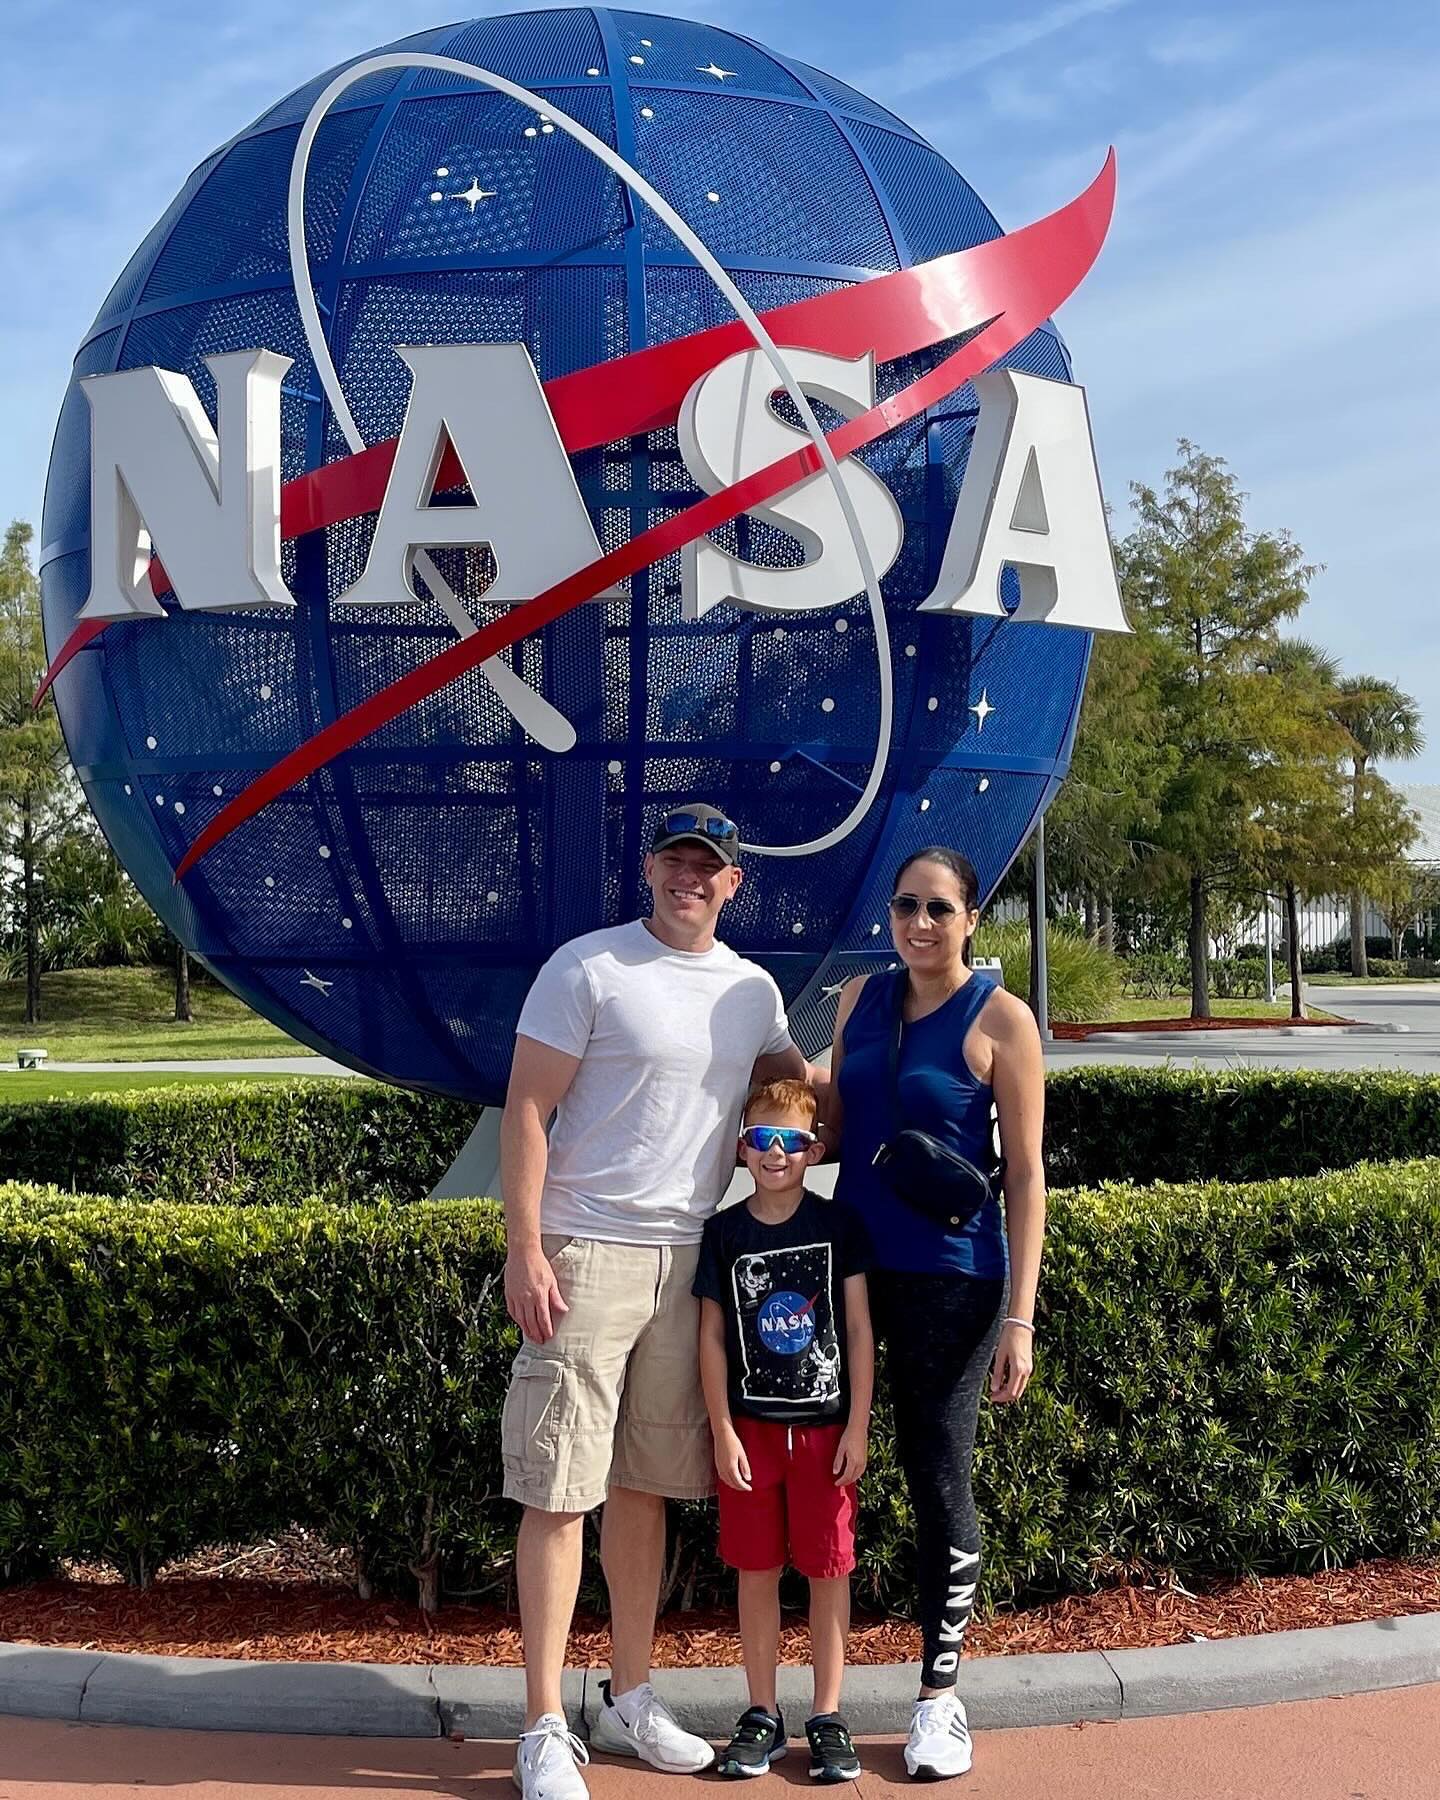 Visiting NASA at Cape Canaveral, Florida! New Video now posted on our YouTube channel. More behind the scene photos added to our Patreon page. 

#nasa #capecanaveral #rockets #amputee #amputeelife #florida